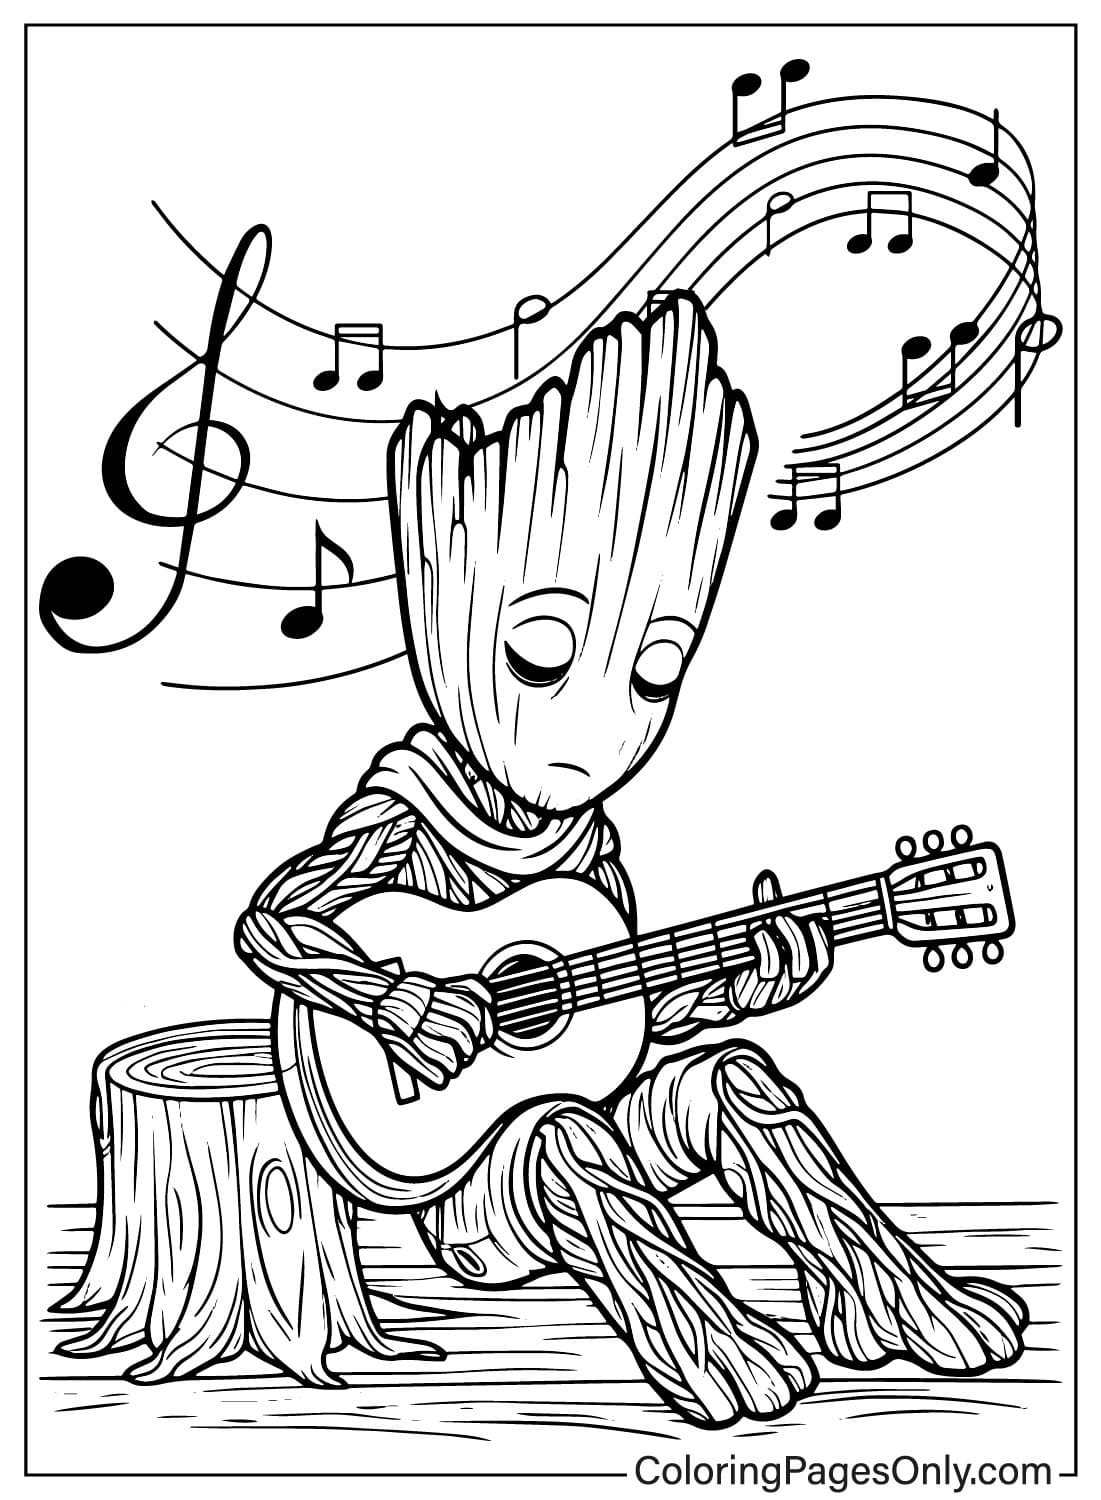 Groot Play the Guitar Coloring Page from Groot